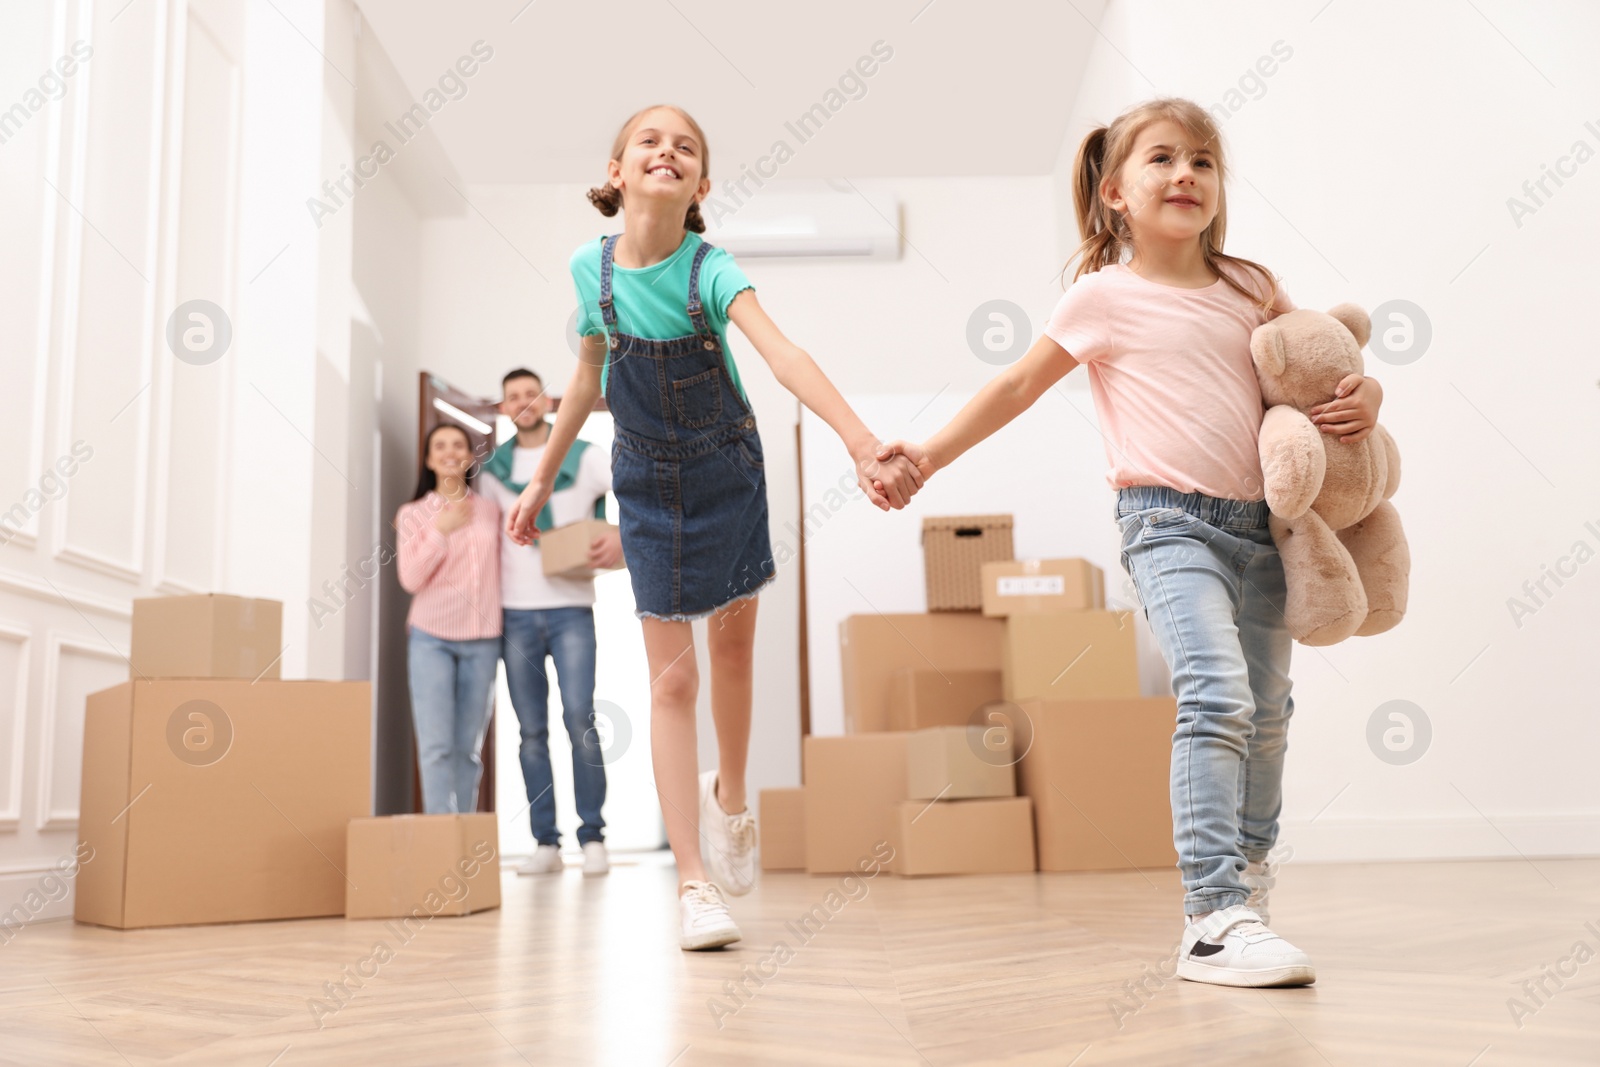 Photo of Happy family with children moving into new house, low angle view